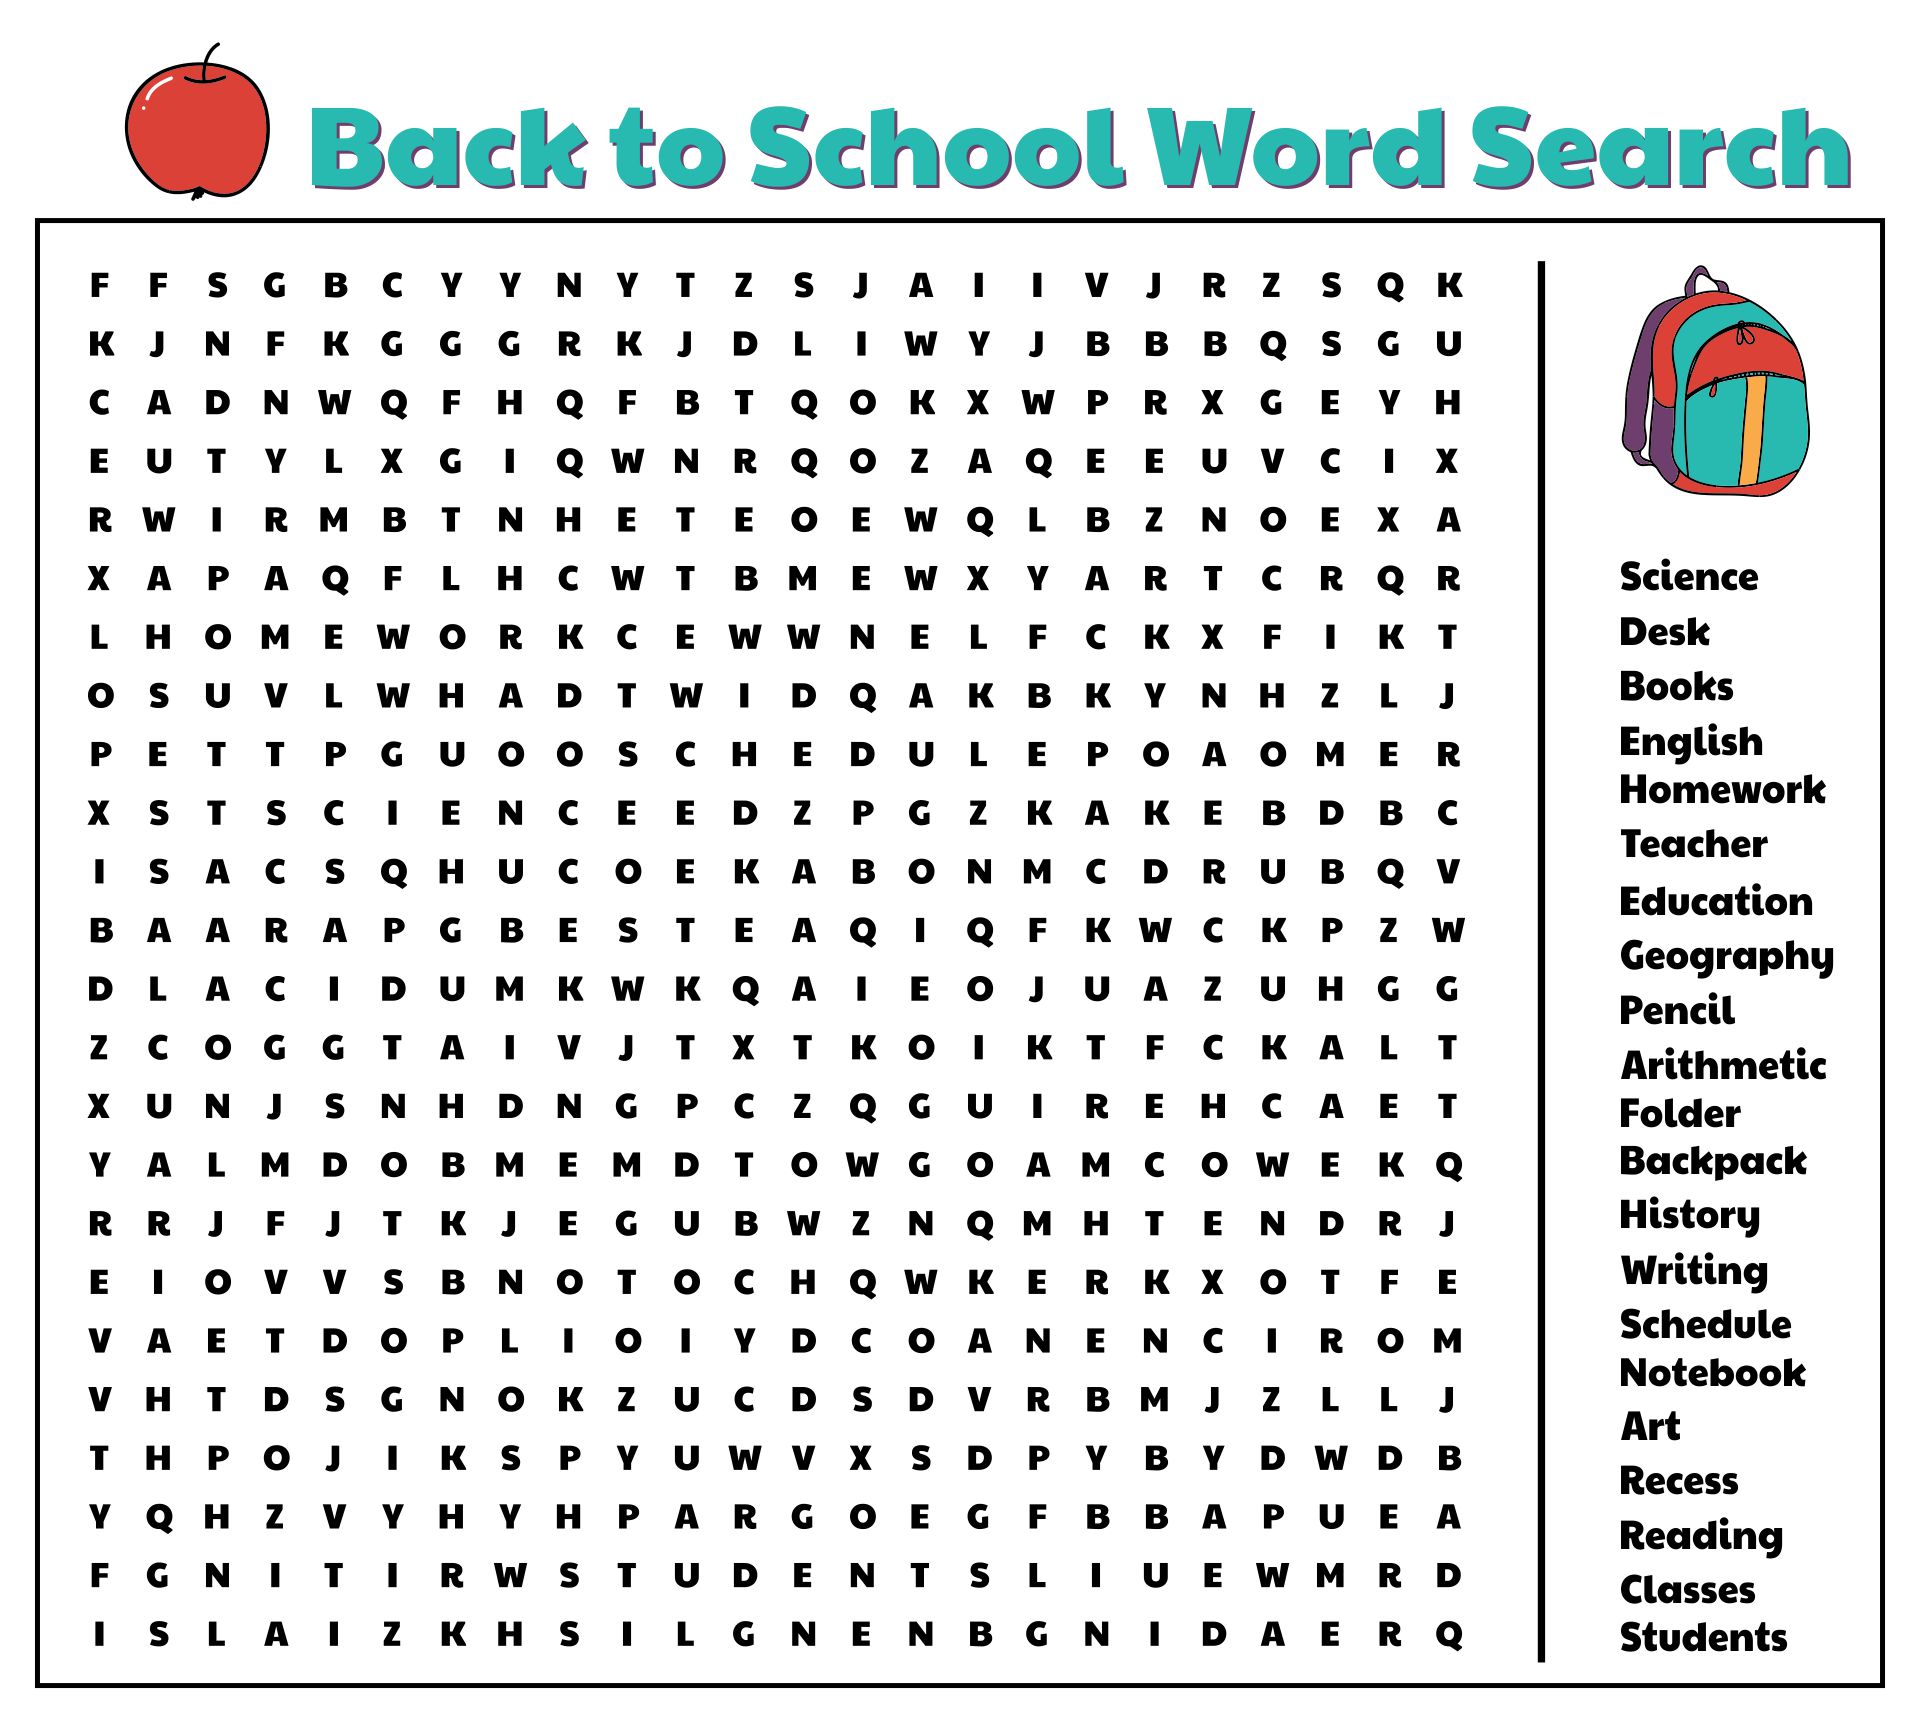 4-best-images-of-school-word-search-puzzles-printable-school-word-search-puzzles-back-to